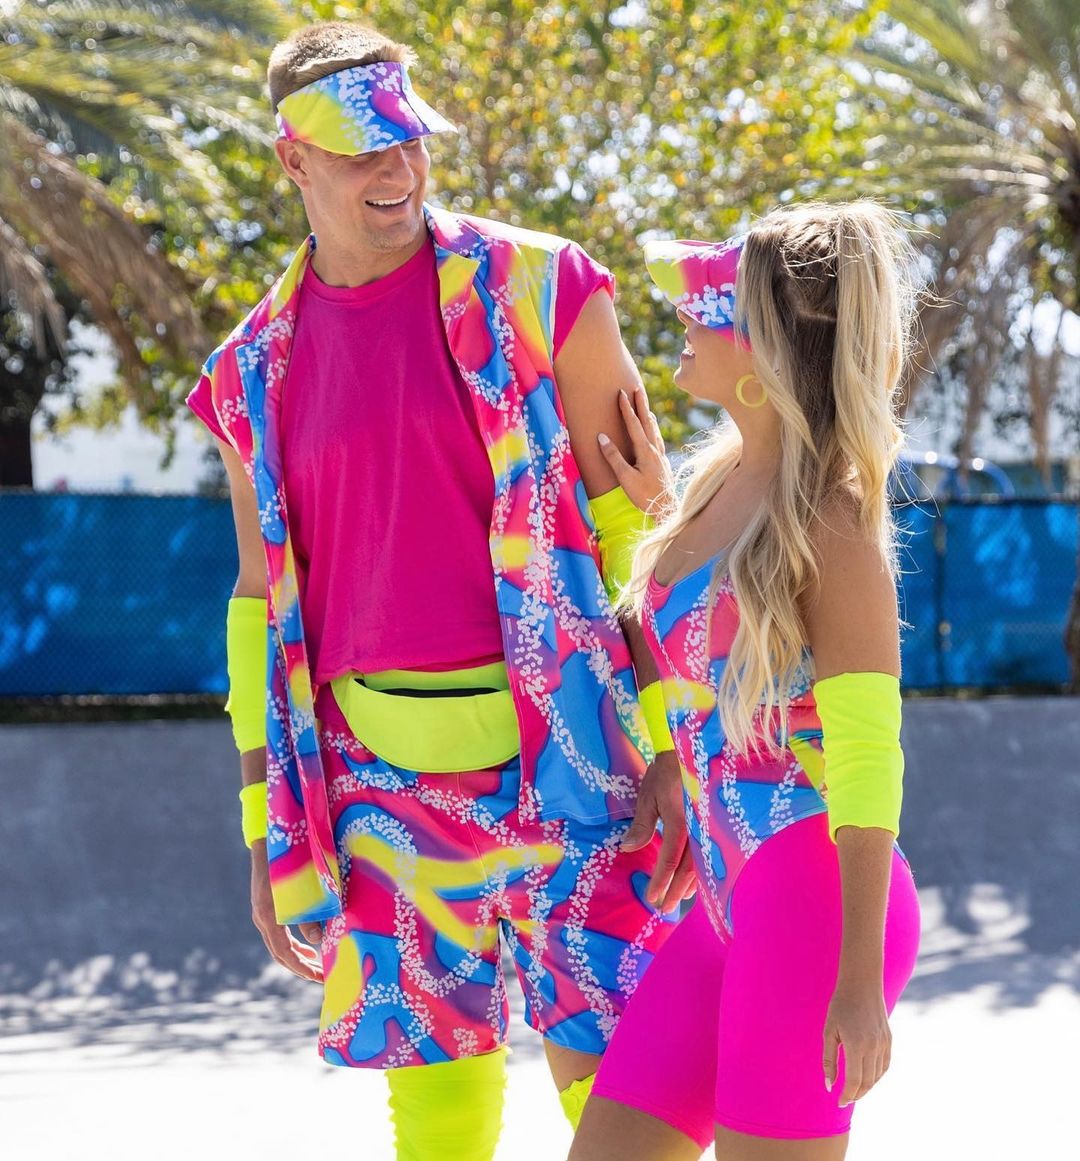 Photos n°2 : Gronk and Camille Kostek as Margot Robbie and Ryan Gosling’s Ken and Barbie!